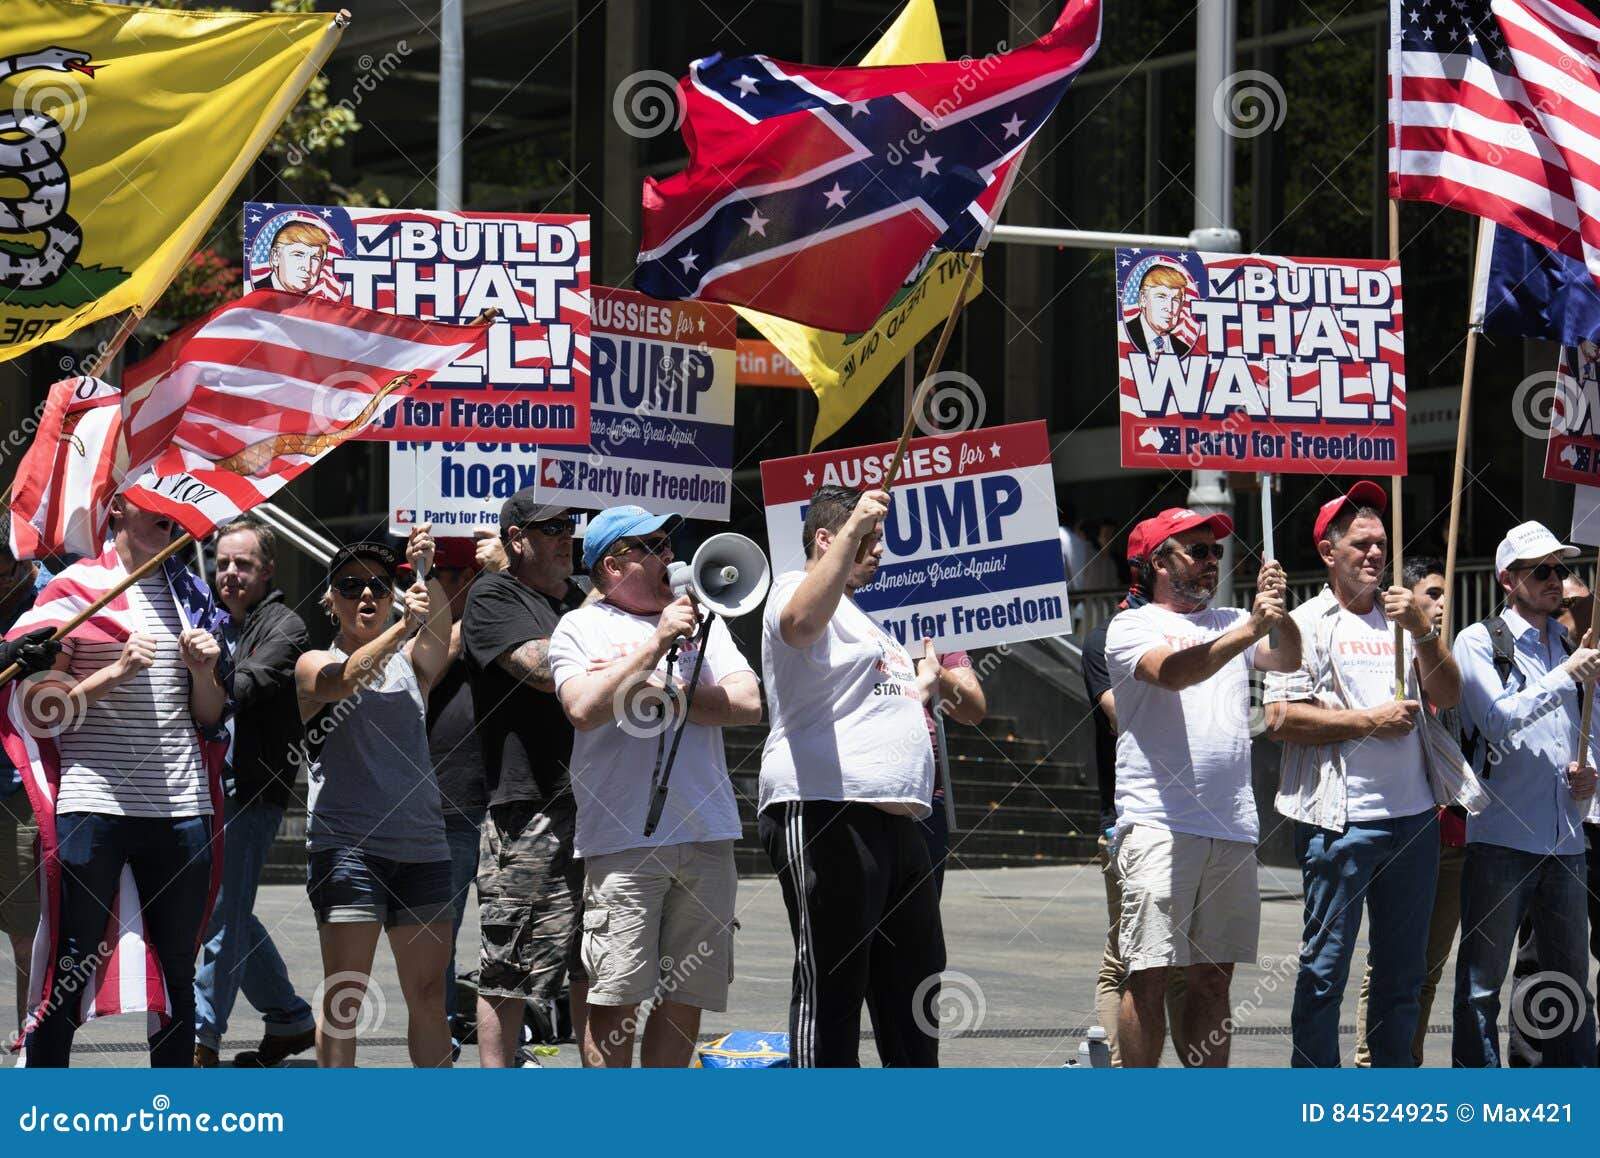 pro-trump-supporter-sydney-australia-small-group-right-wing-supporters-gather-city-to-show-opposition-to-women-s-84524925.jpg